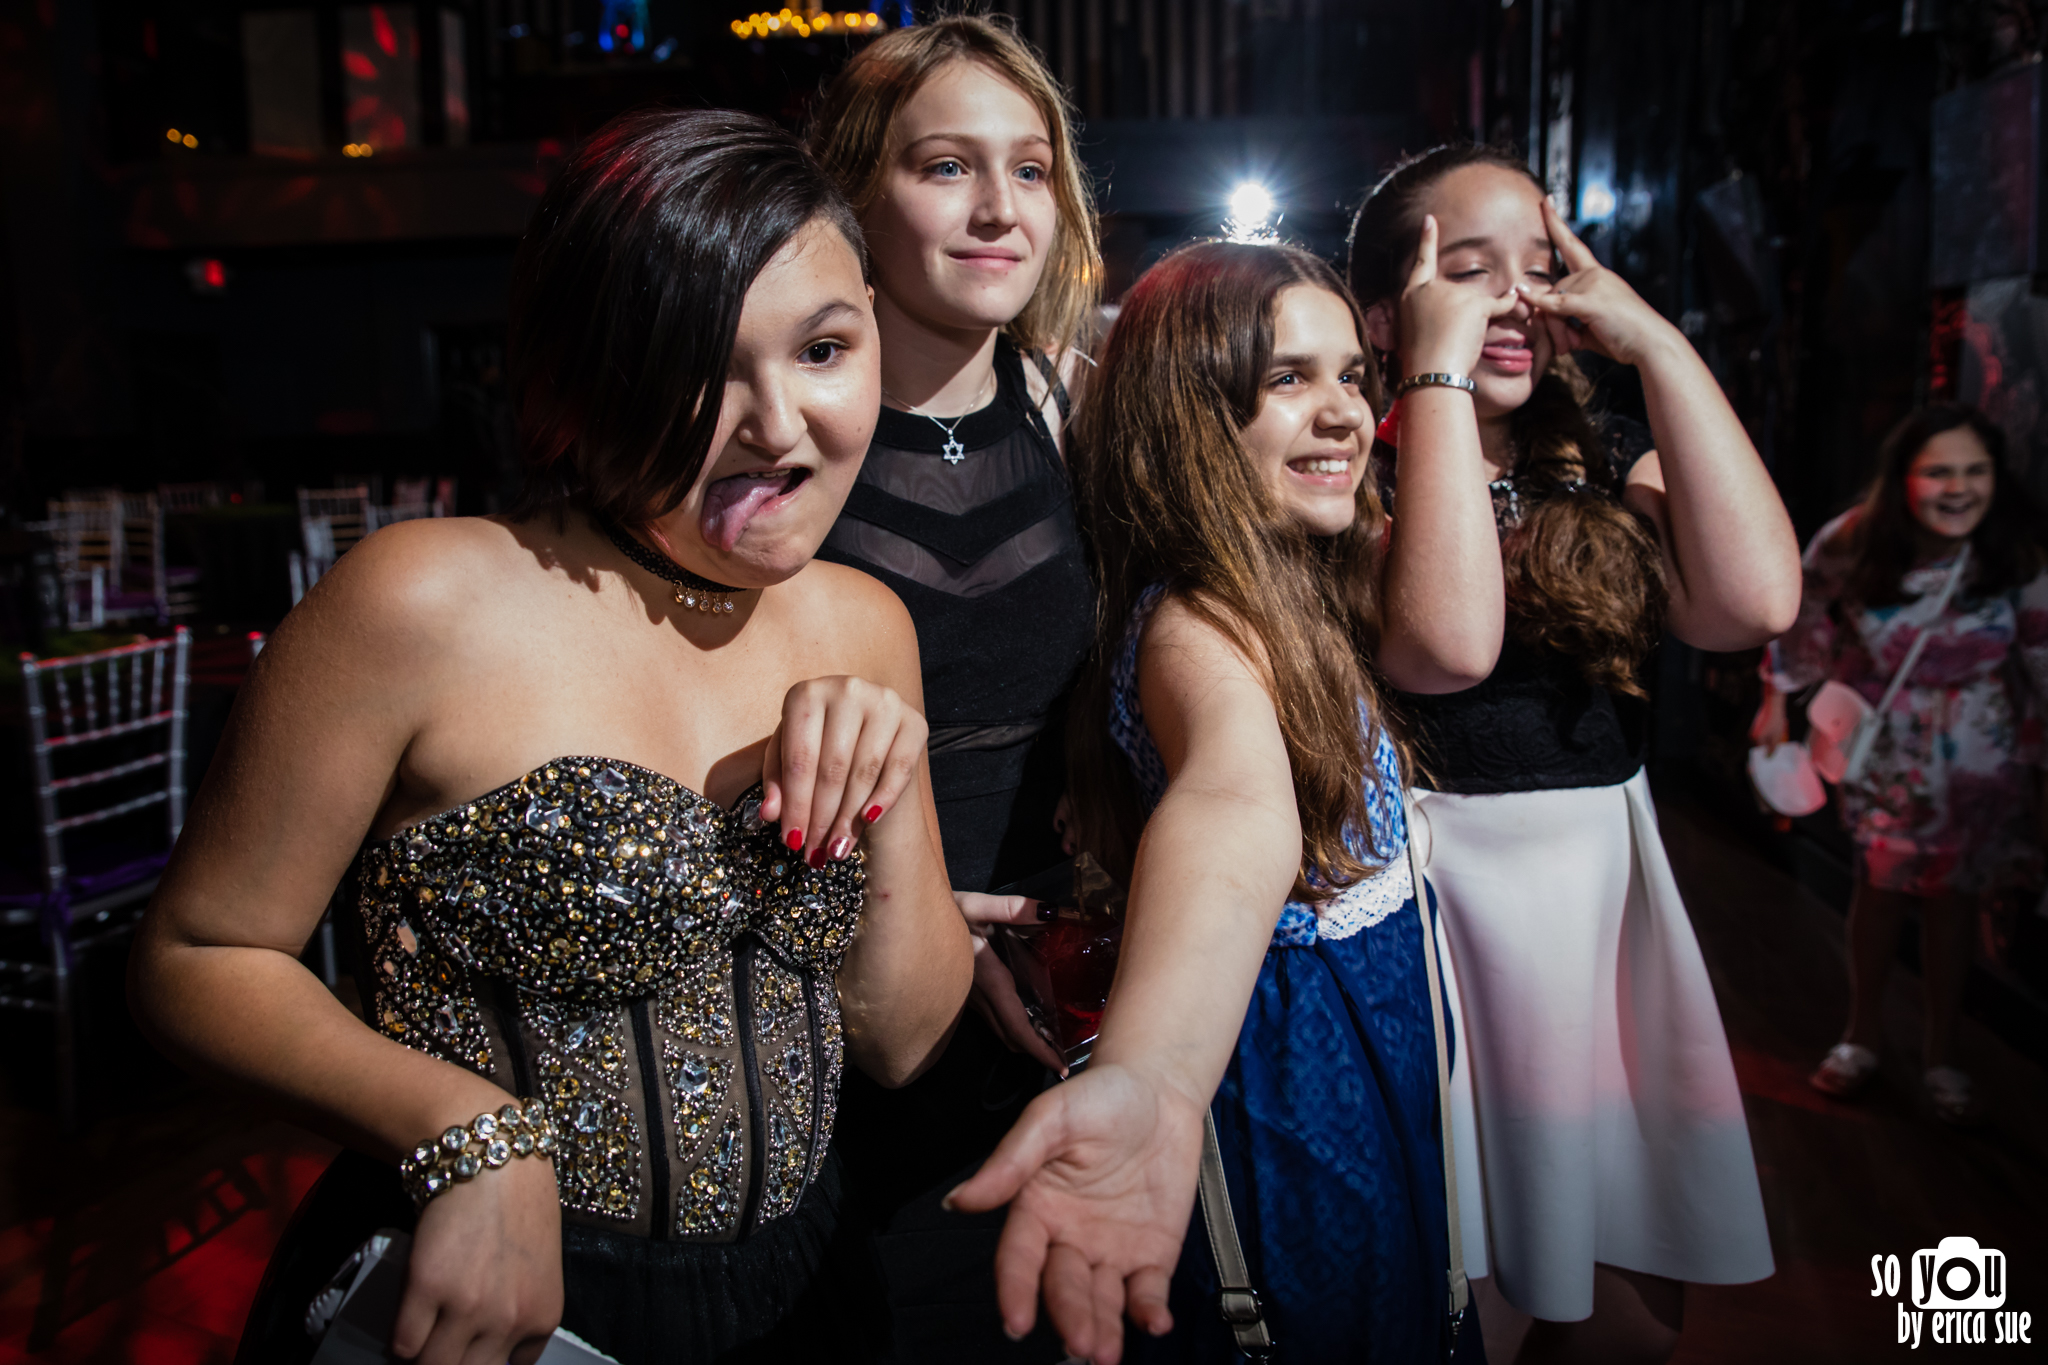 bat-mitzvah-photography-so-you-by-erica-sue-venue-ft-lauderdale-0192.jpg